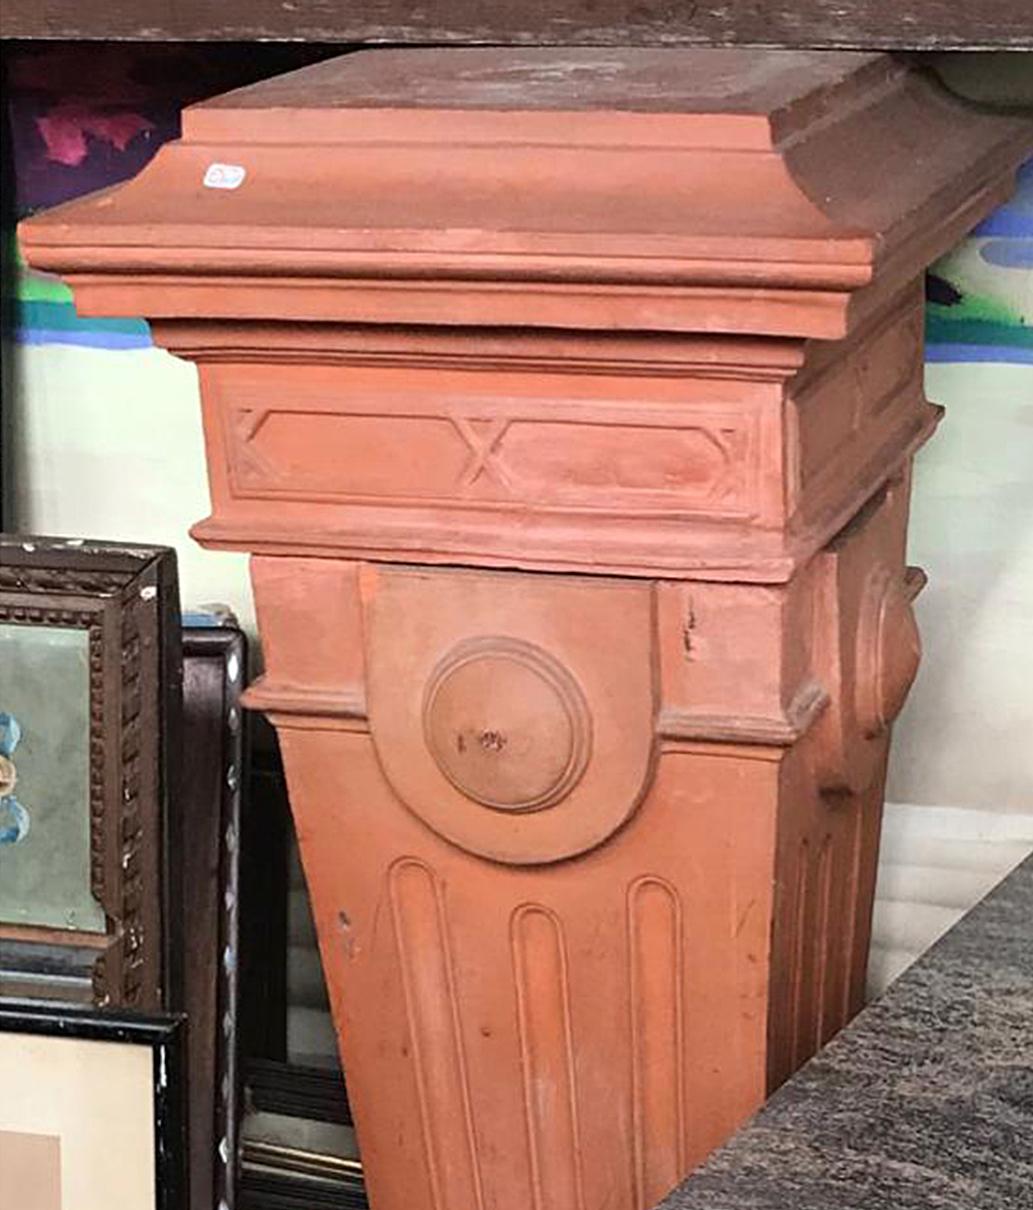 Rare Napoleon III pedestal in terracotta
The top and bottom pieces are separate and fit together.